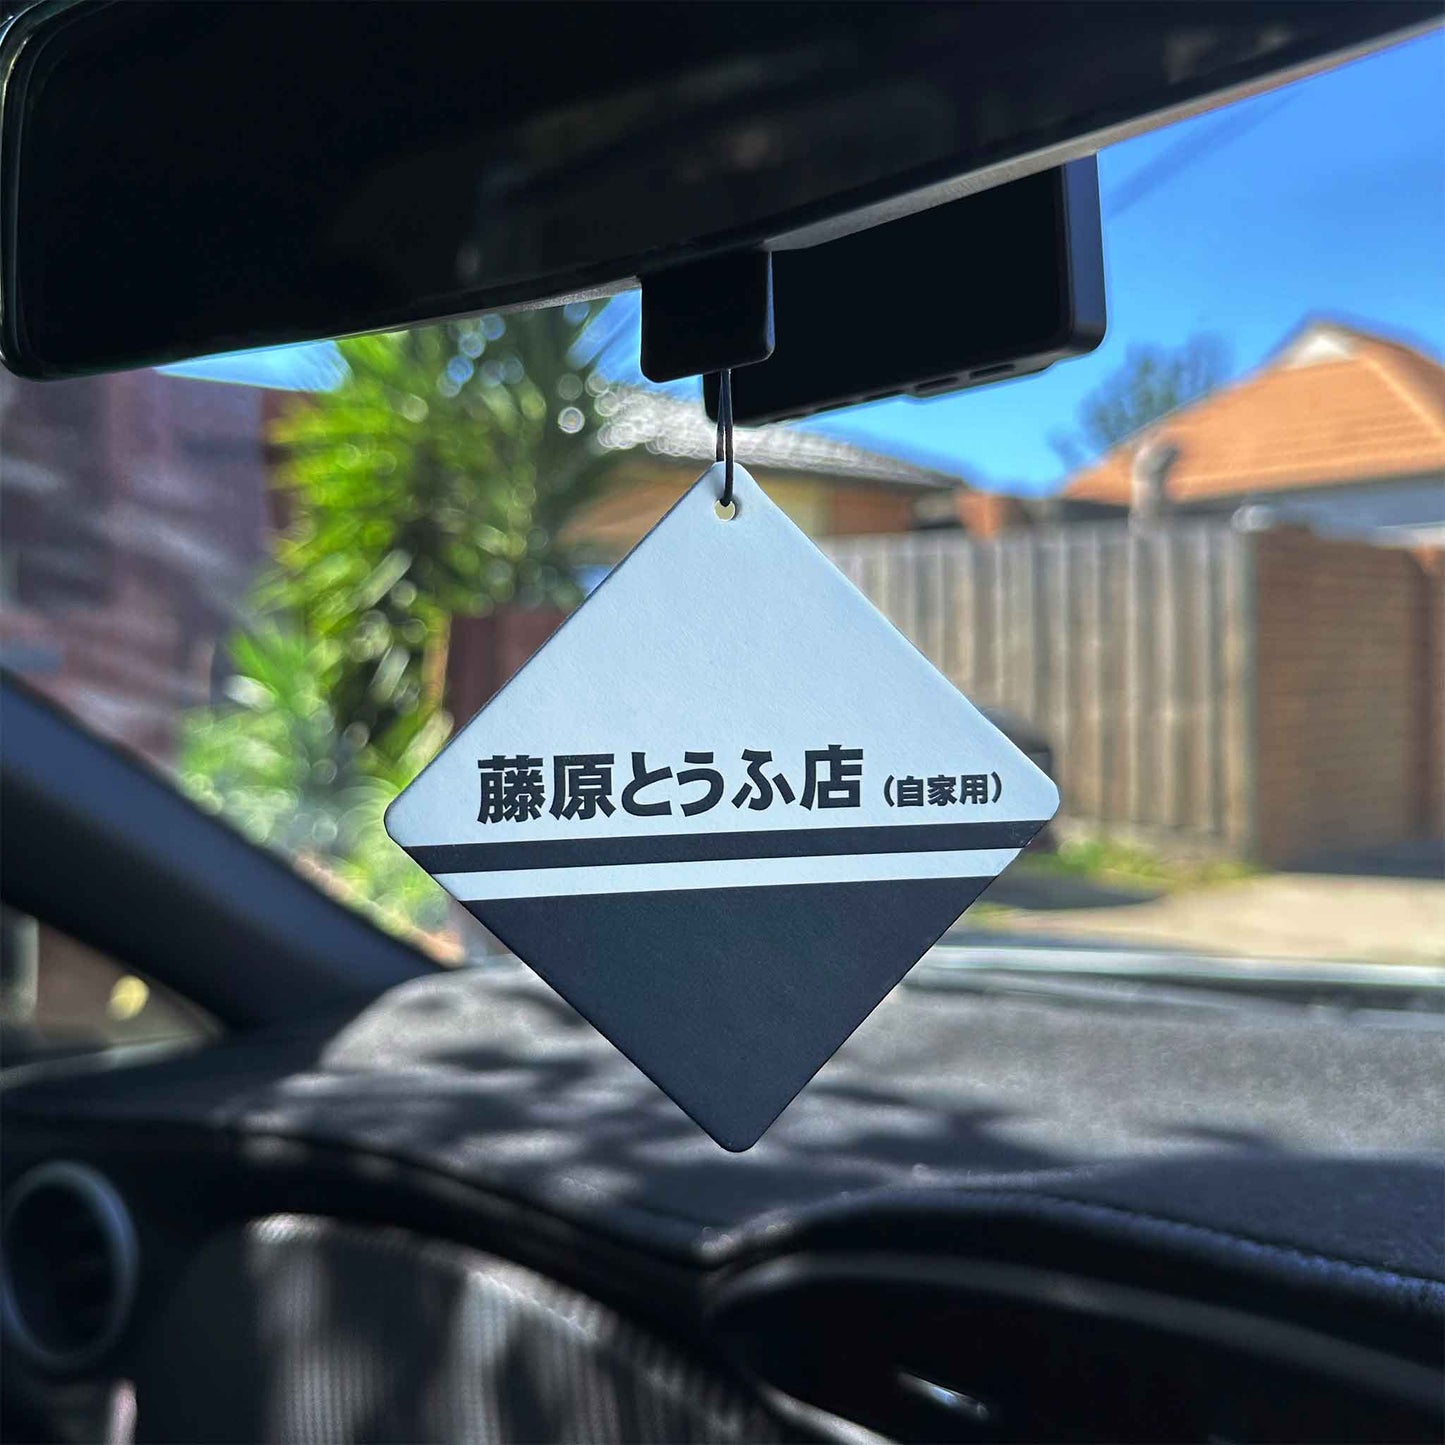 A Fujiwara-tofu-shop-themed rearview mirror air freshener hung in a car, with green tree and blue sky as background